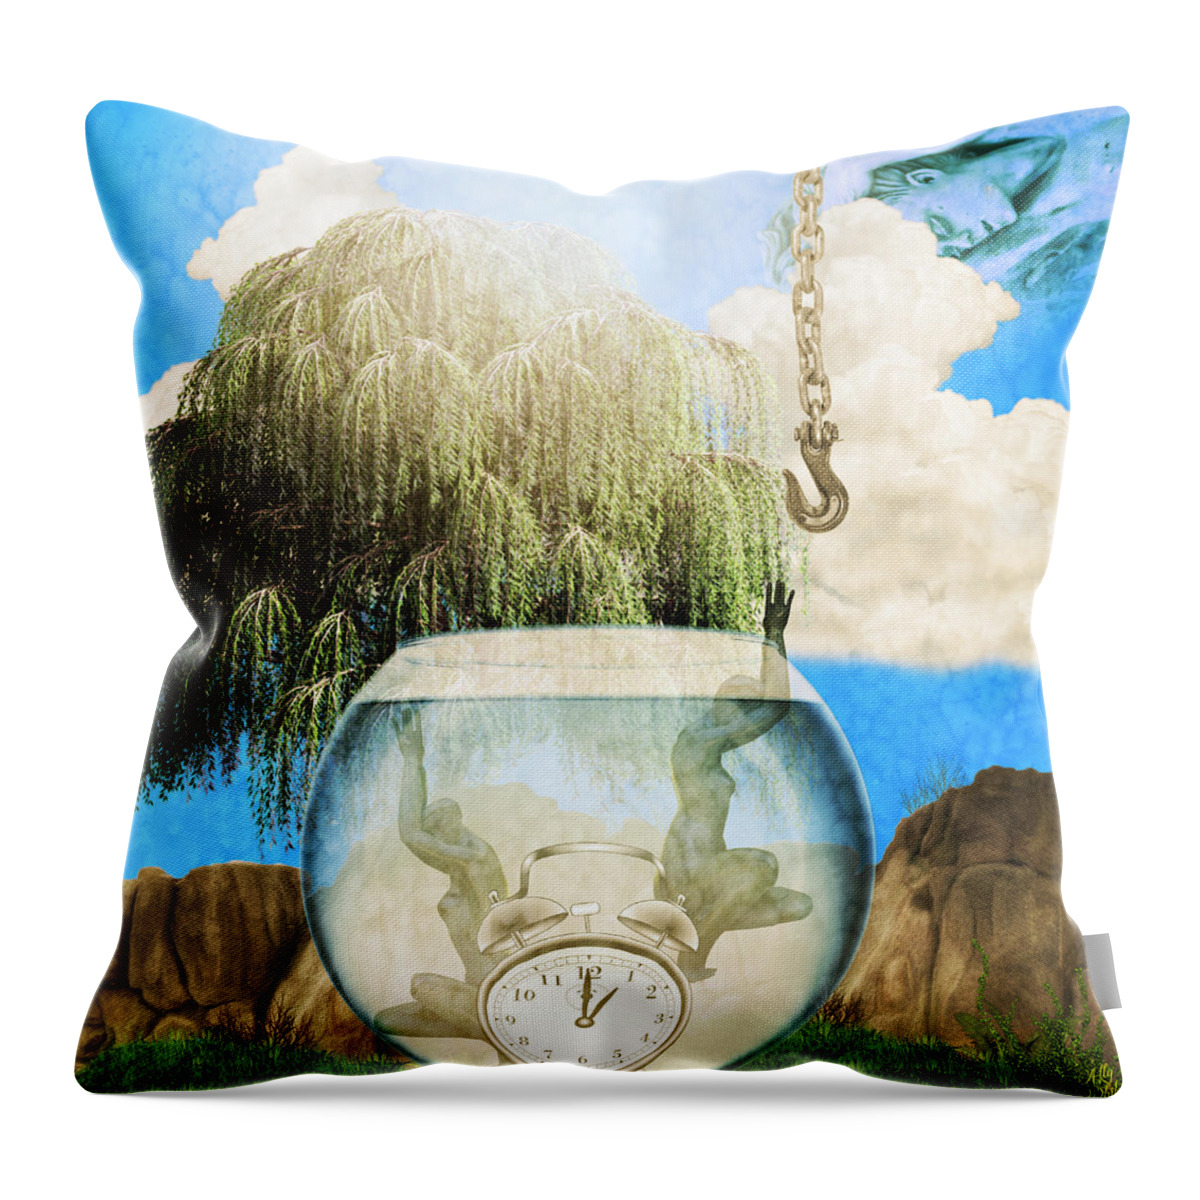 Two Lost Souls Throw Pillow featuring the mixed media Two Lost Souls by Ally White